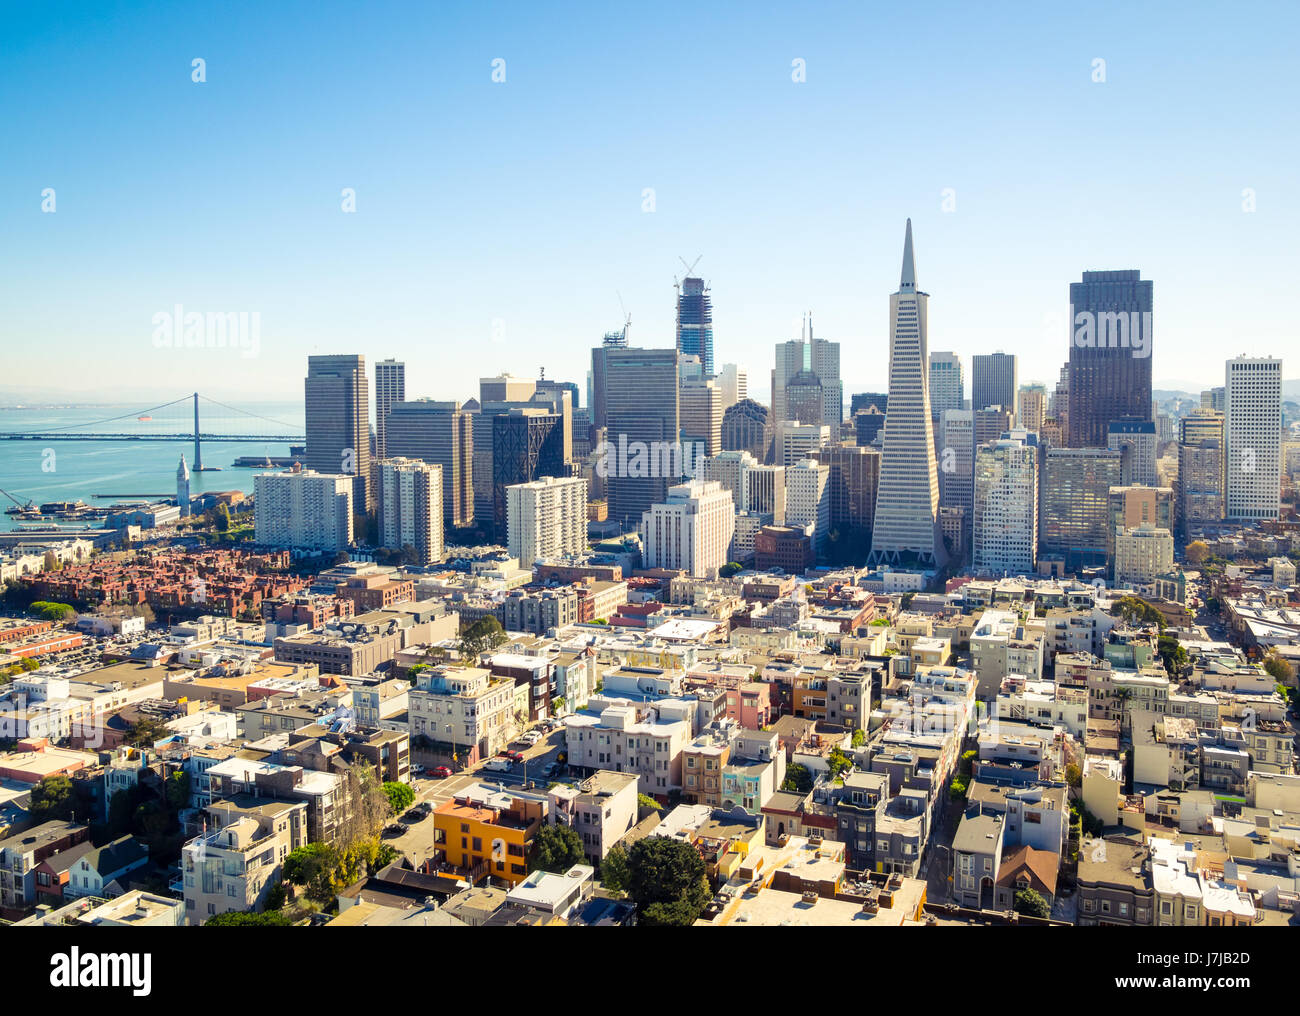 The sensational skyline of downtown San Francisco, California as seen from atop Coit Tower on Telegraph Hill. Stock Photo